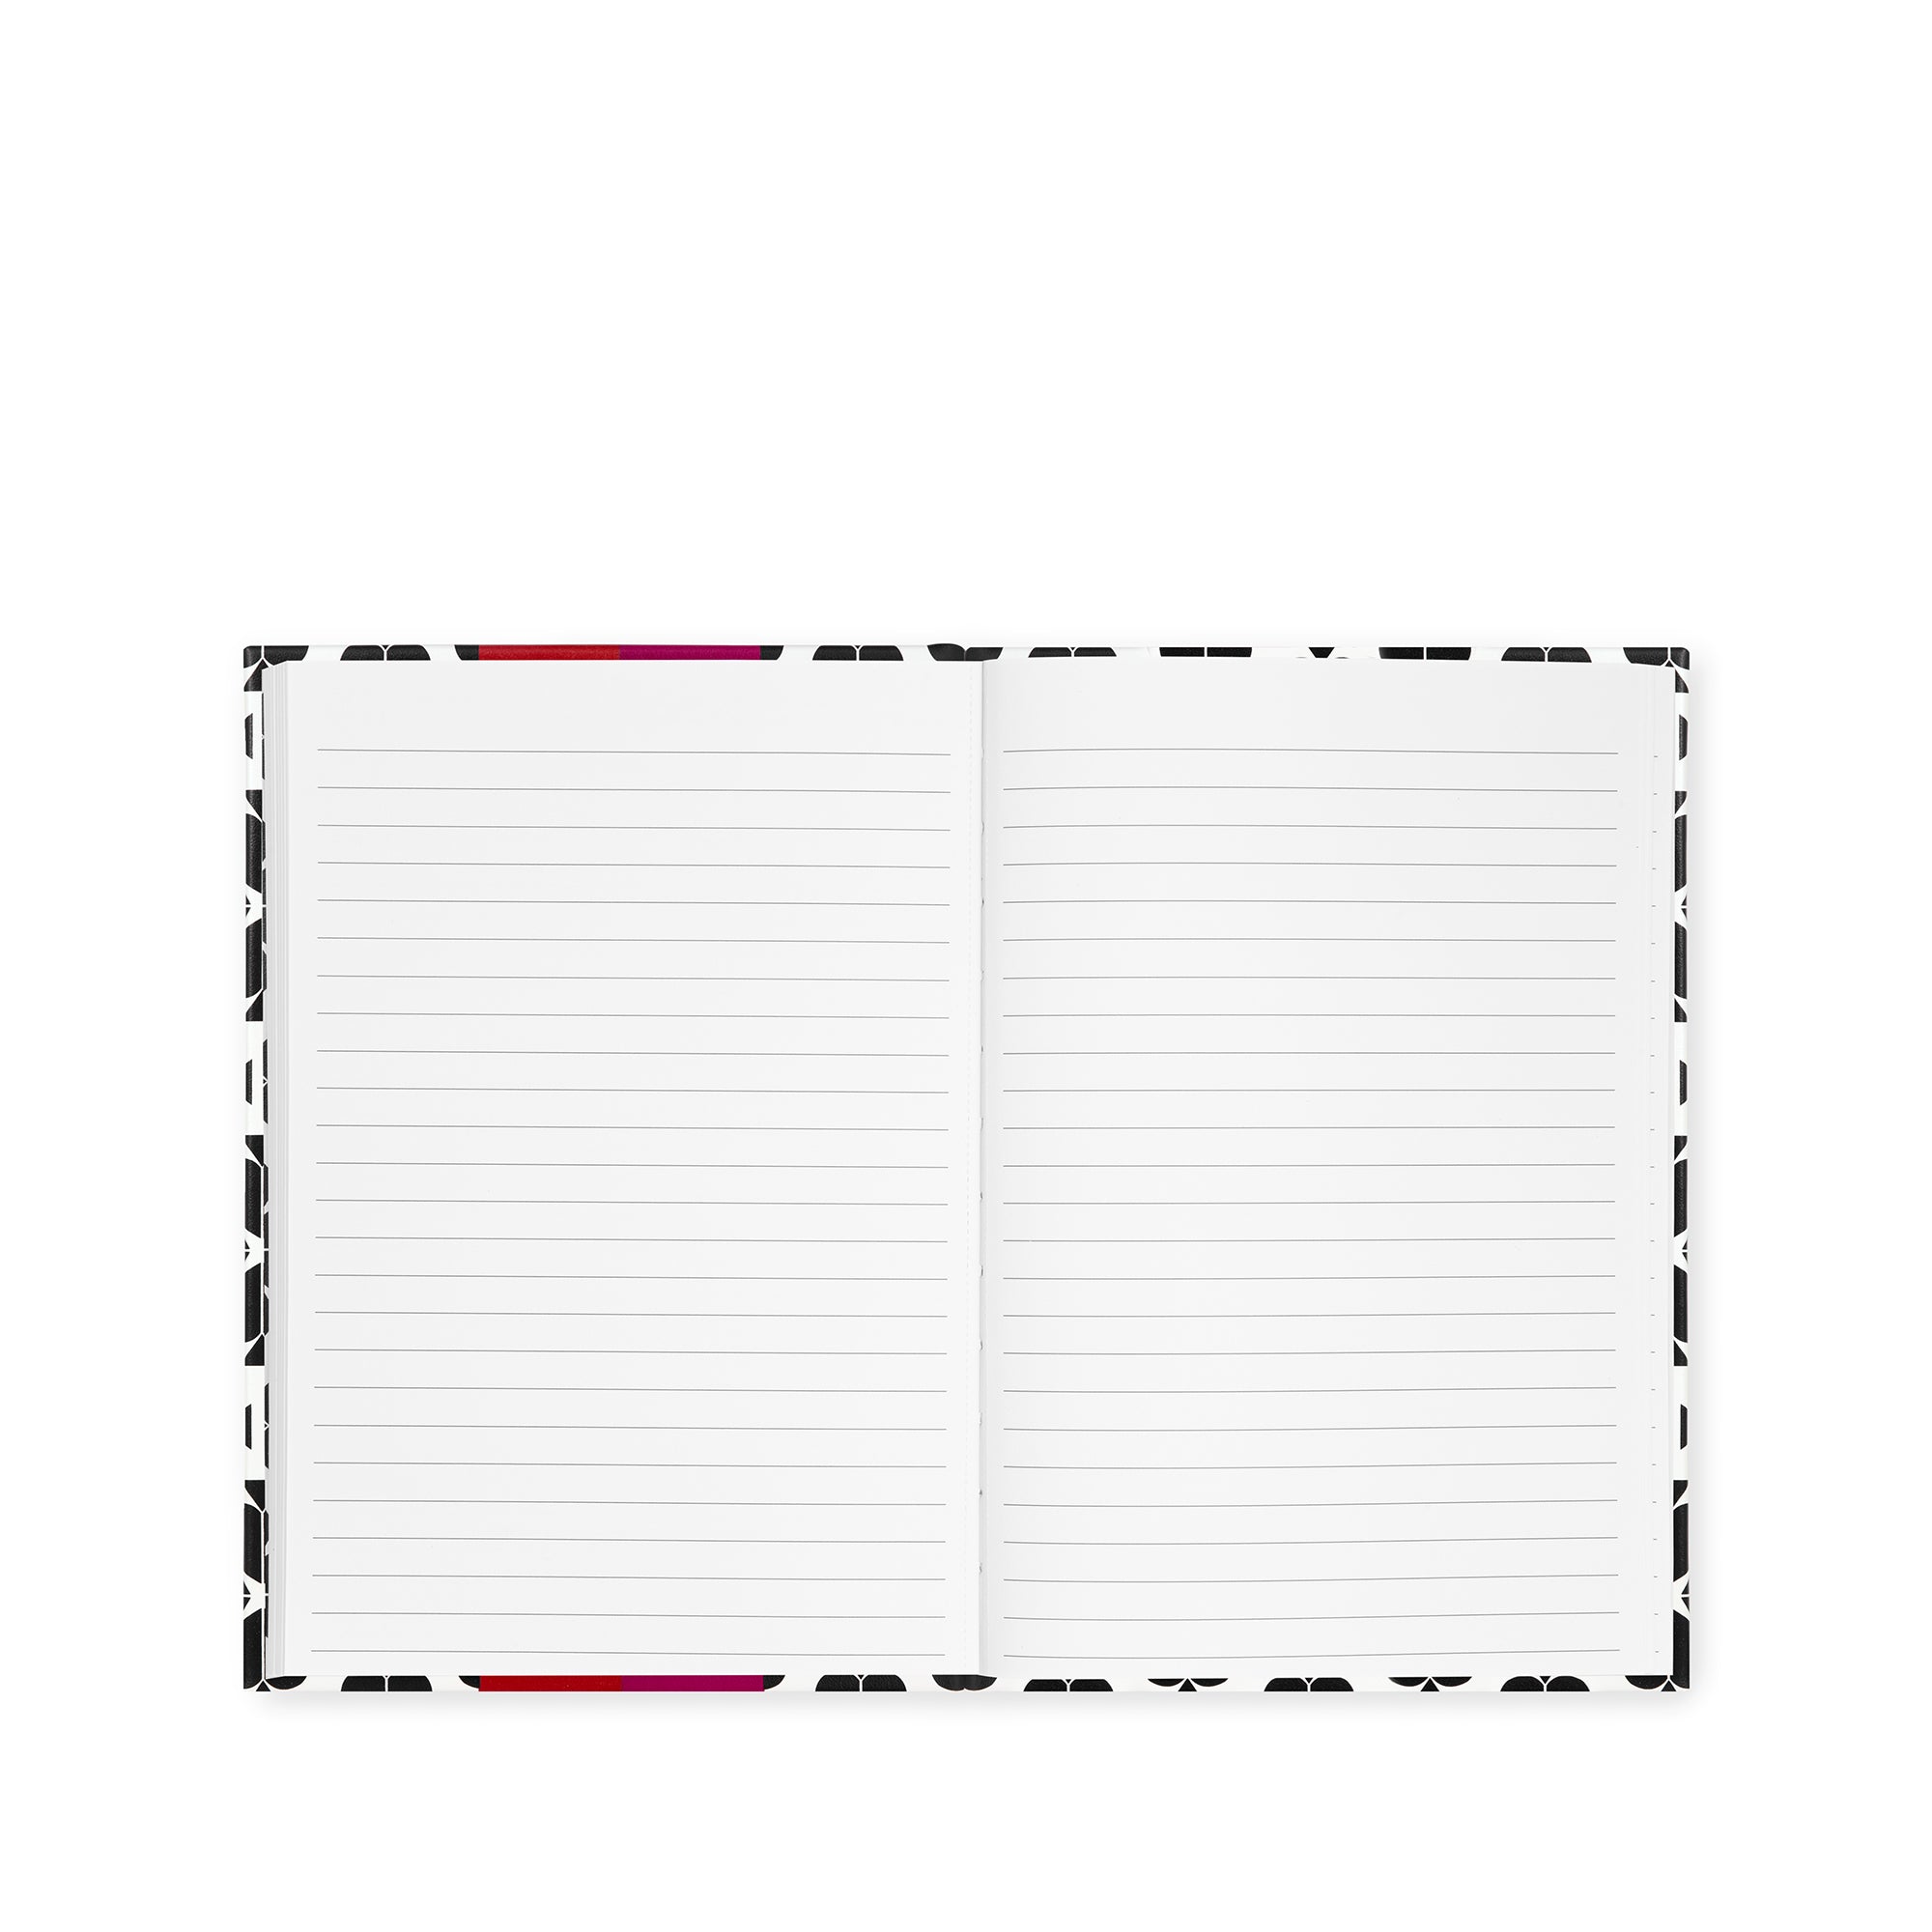 Kate Spade Daily To Do Planner - Black Spade